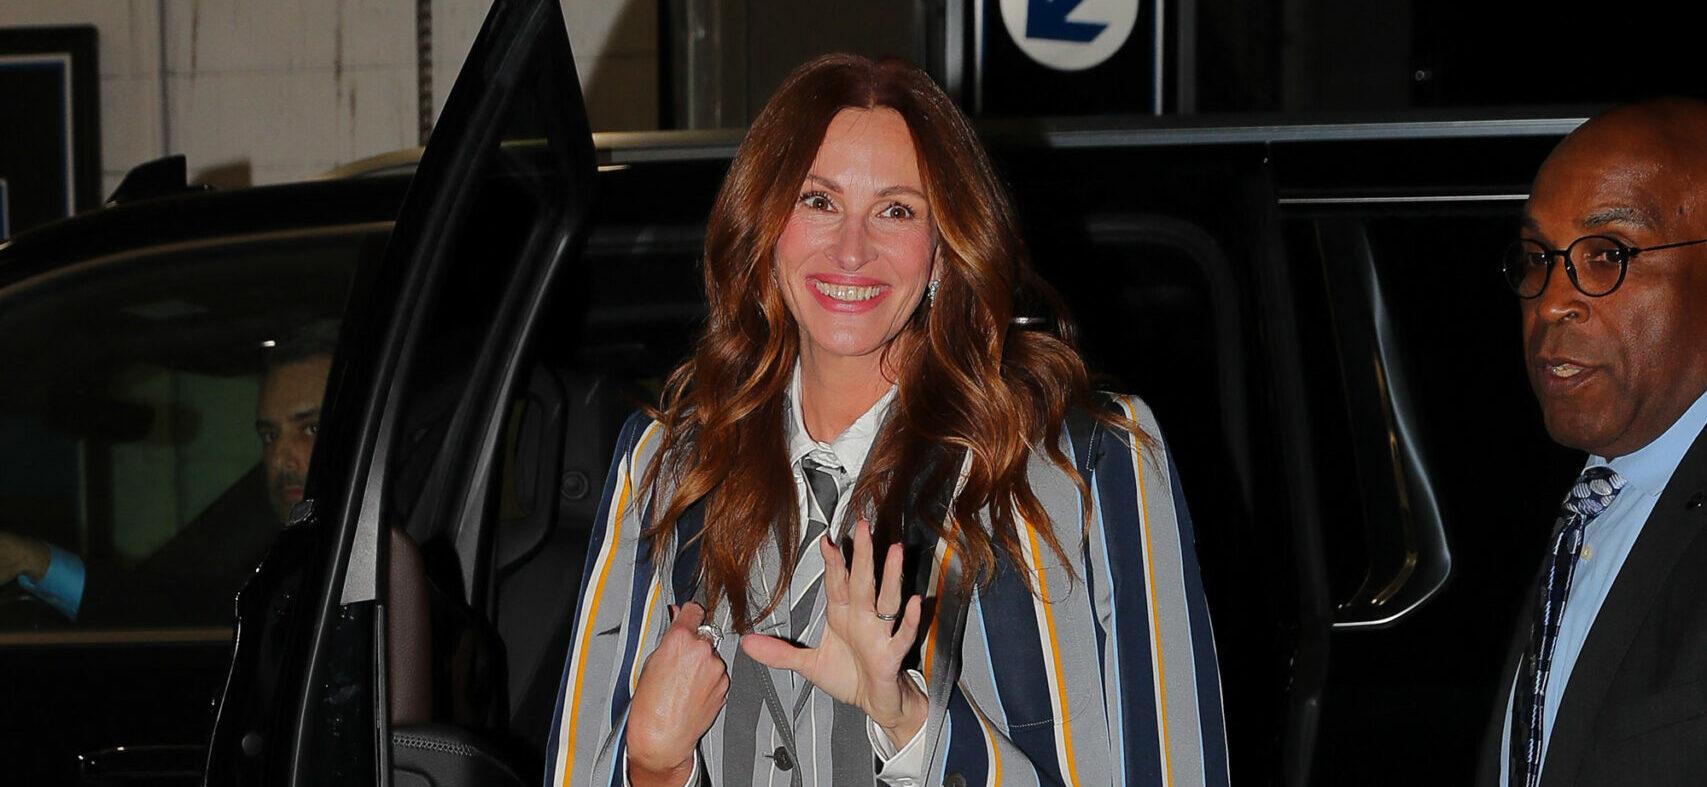 Julia Roberts wears a pinstriped skirt suit while arrives at the Jazz at Lincoln Center in New York City